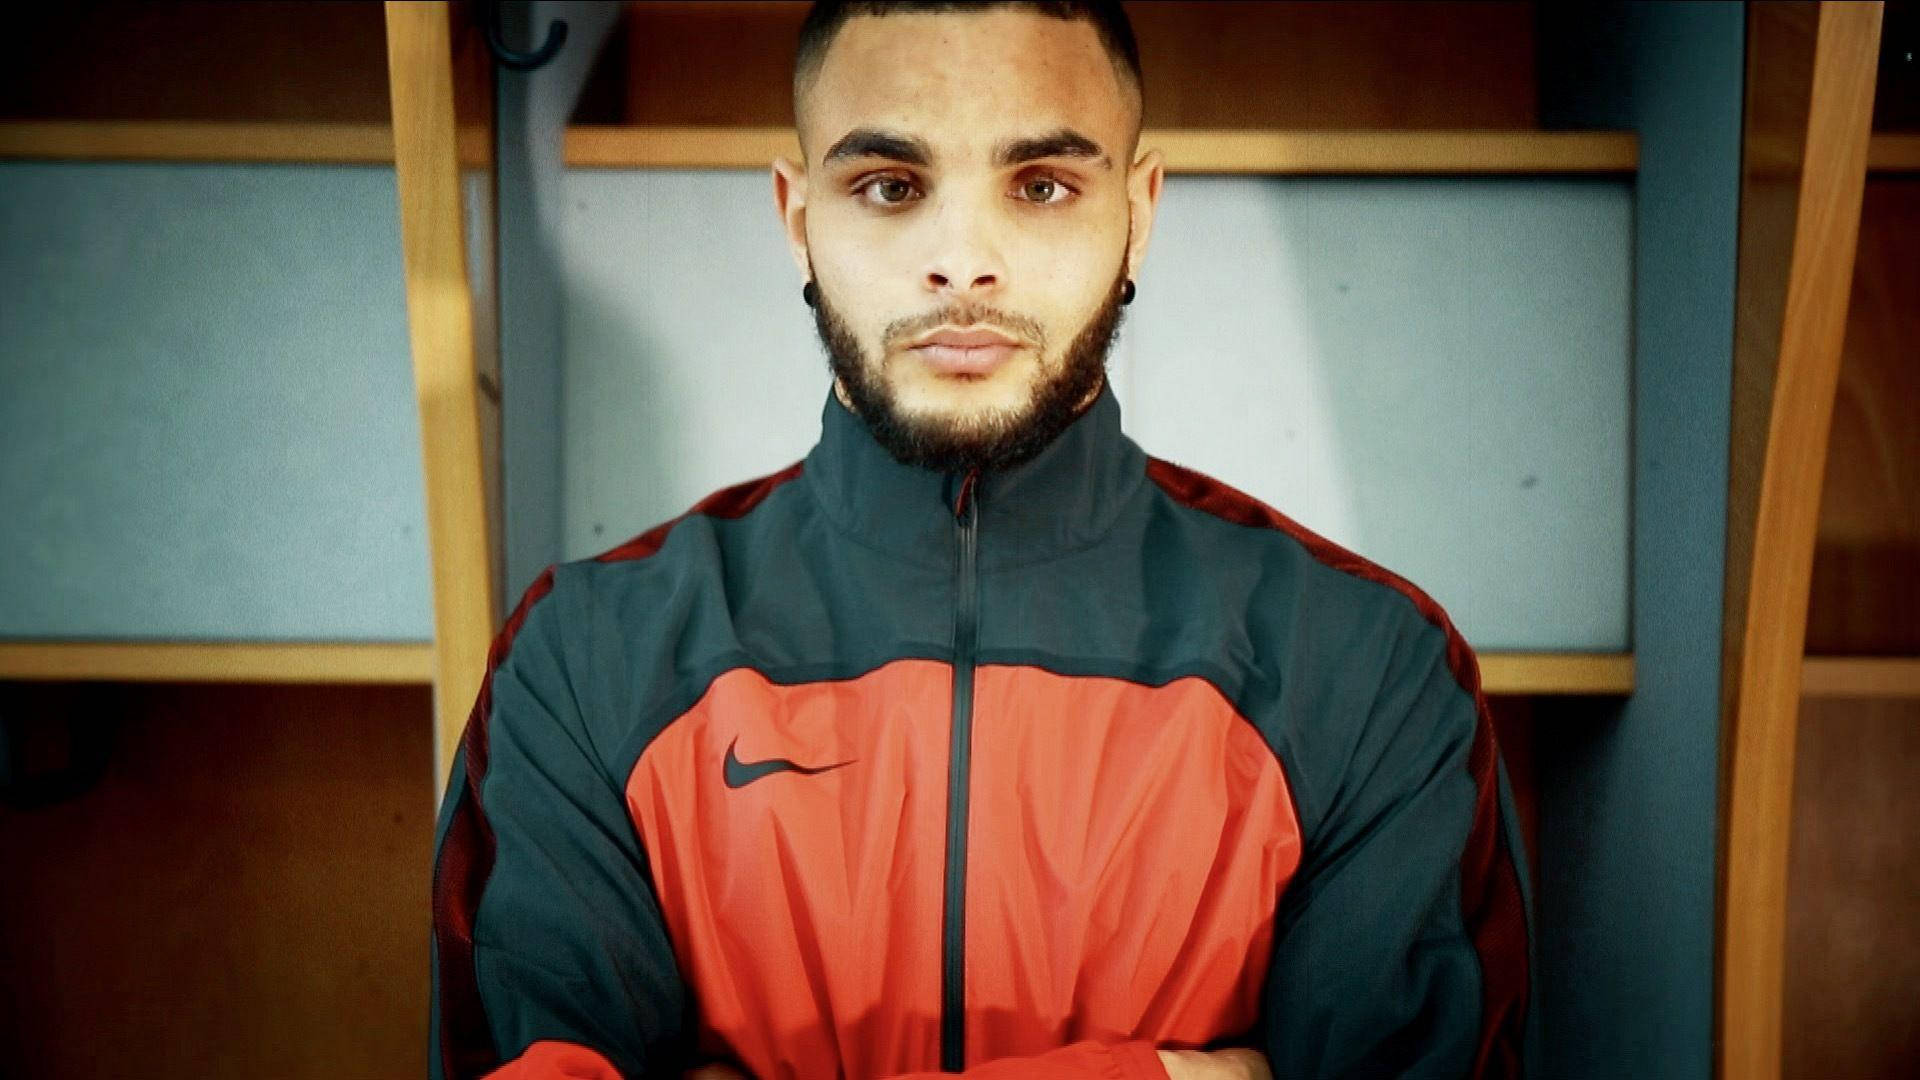 Layvinkurzawa Vignette Nike Translates To Layvin Kurzawa Vignette Nike In Portuguese And Does Not Require Translation As It Is A Proper Noun. However, If Used In The Context Of Computer Or Mobile Wallpaper, It Would Be Displayed As 